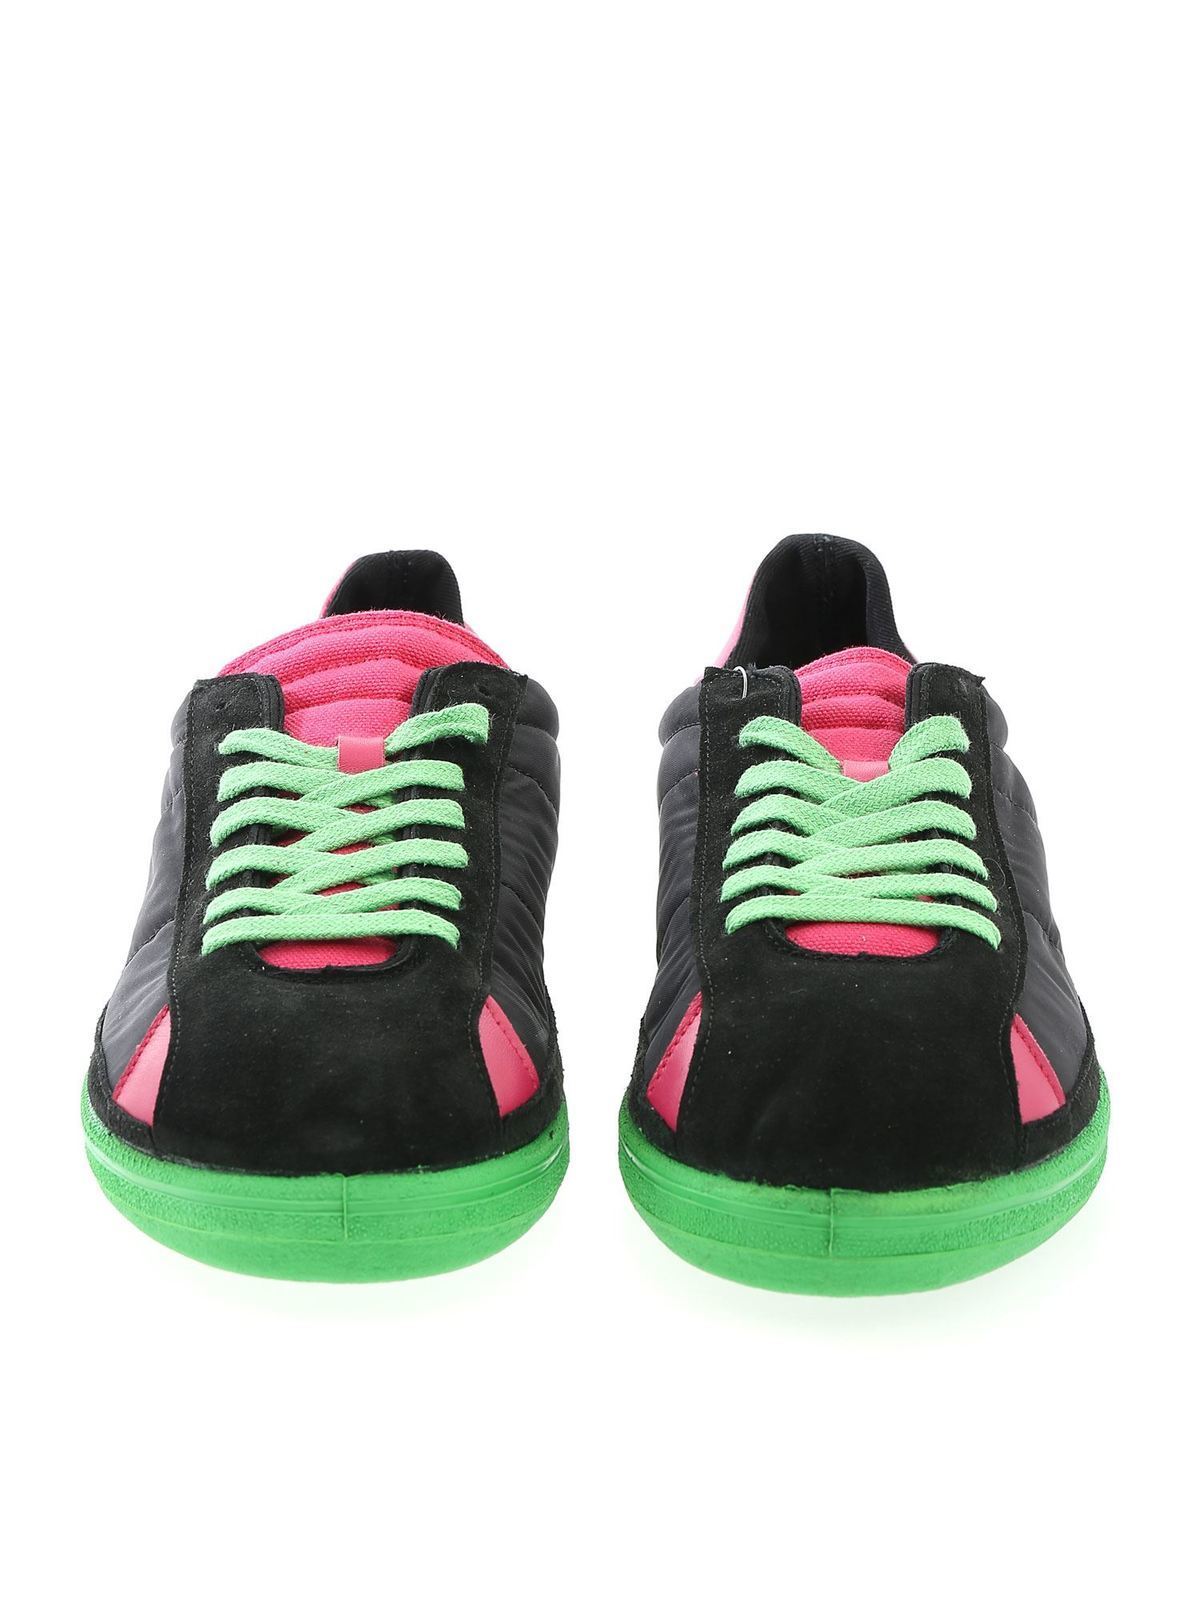 black and green trainers